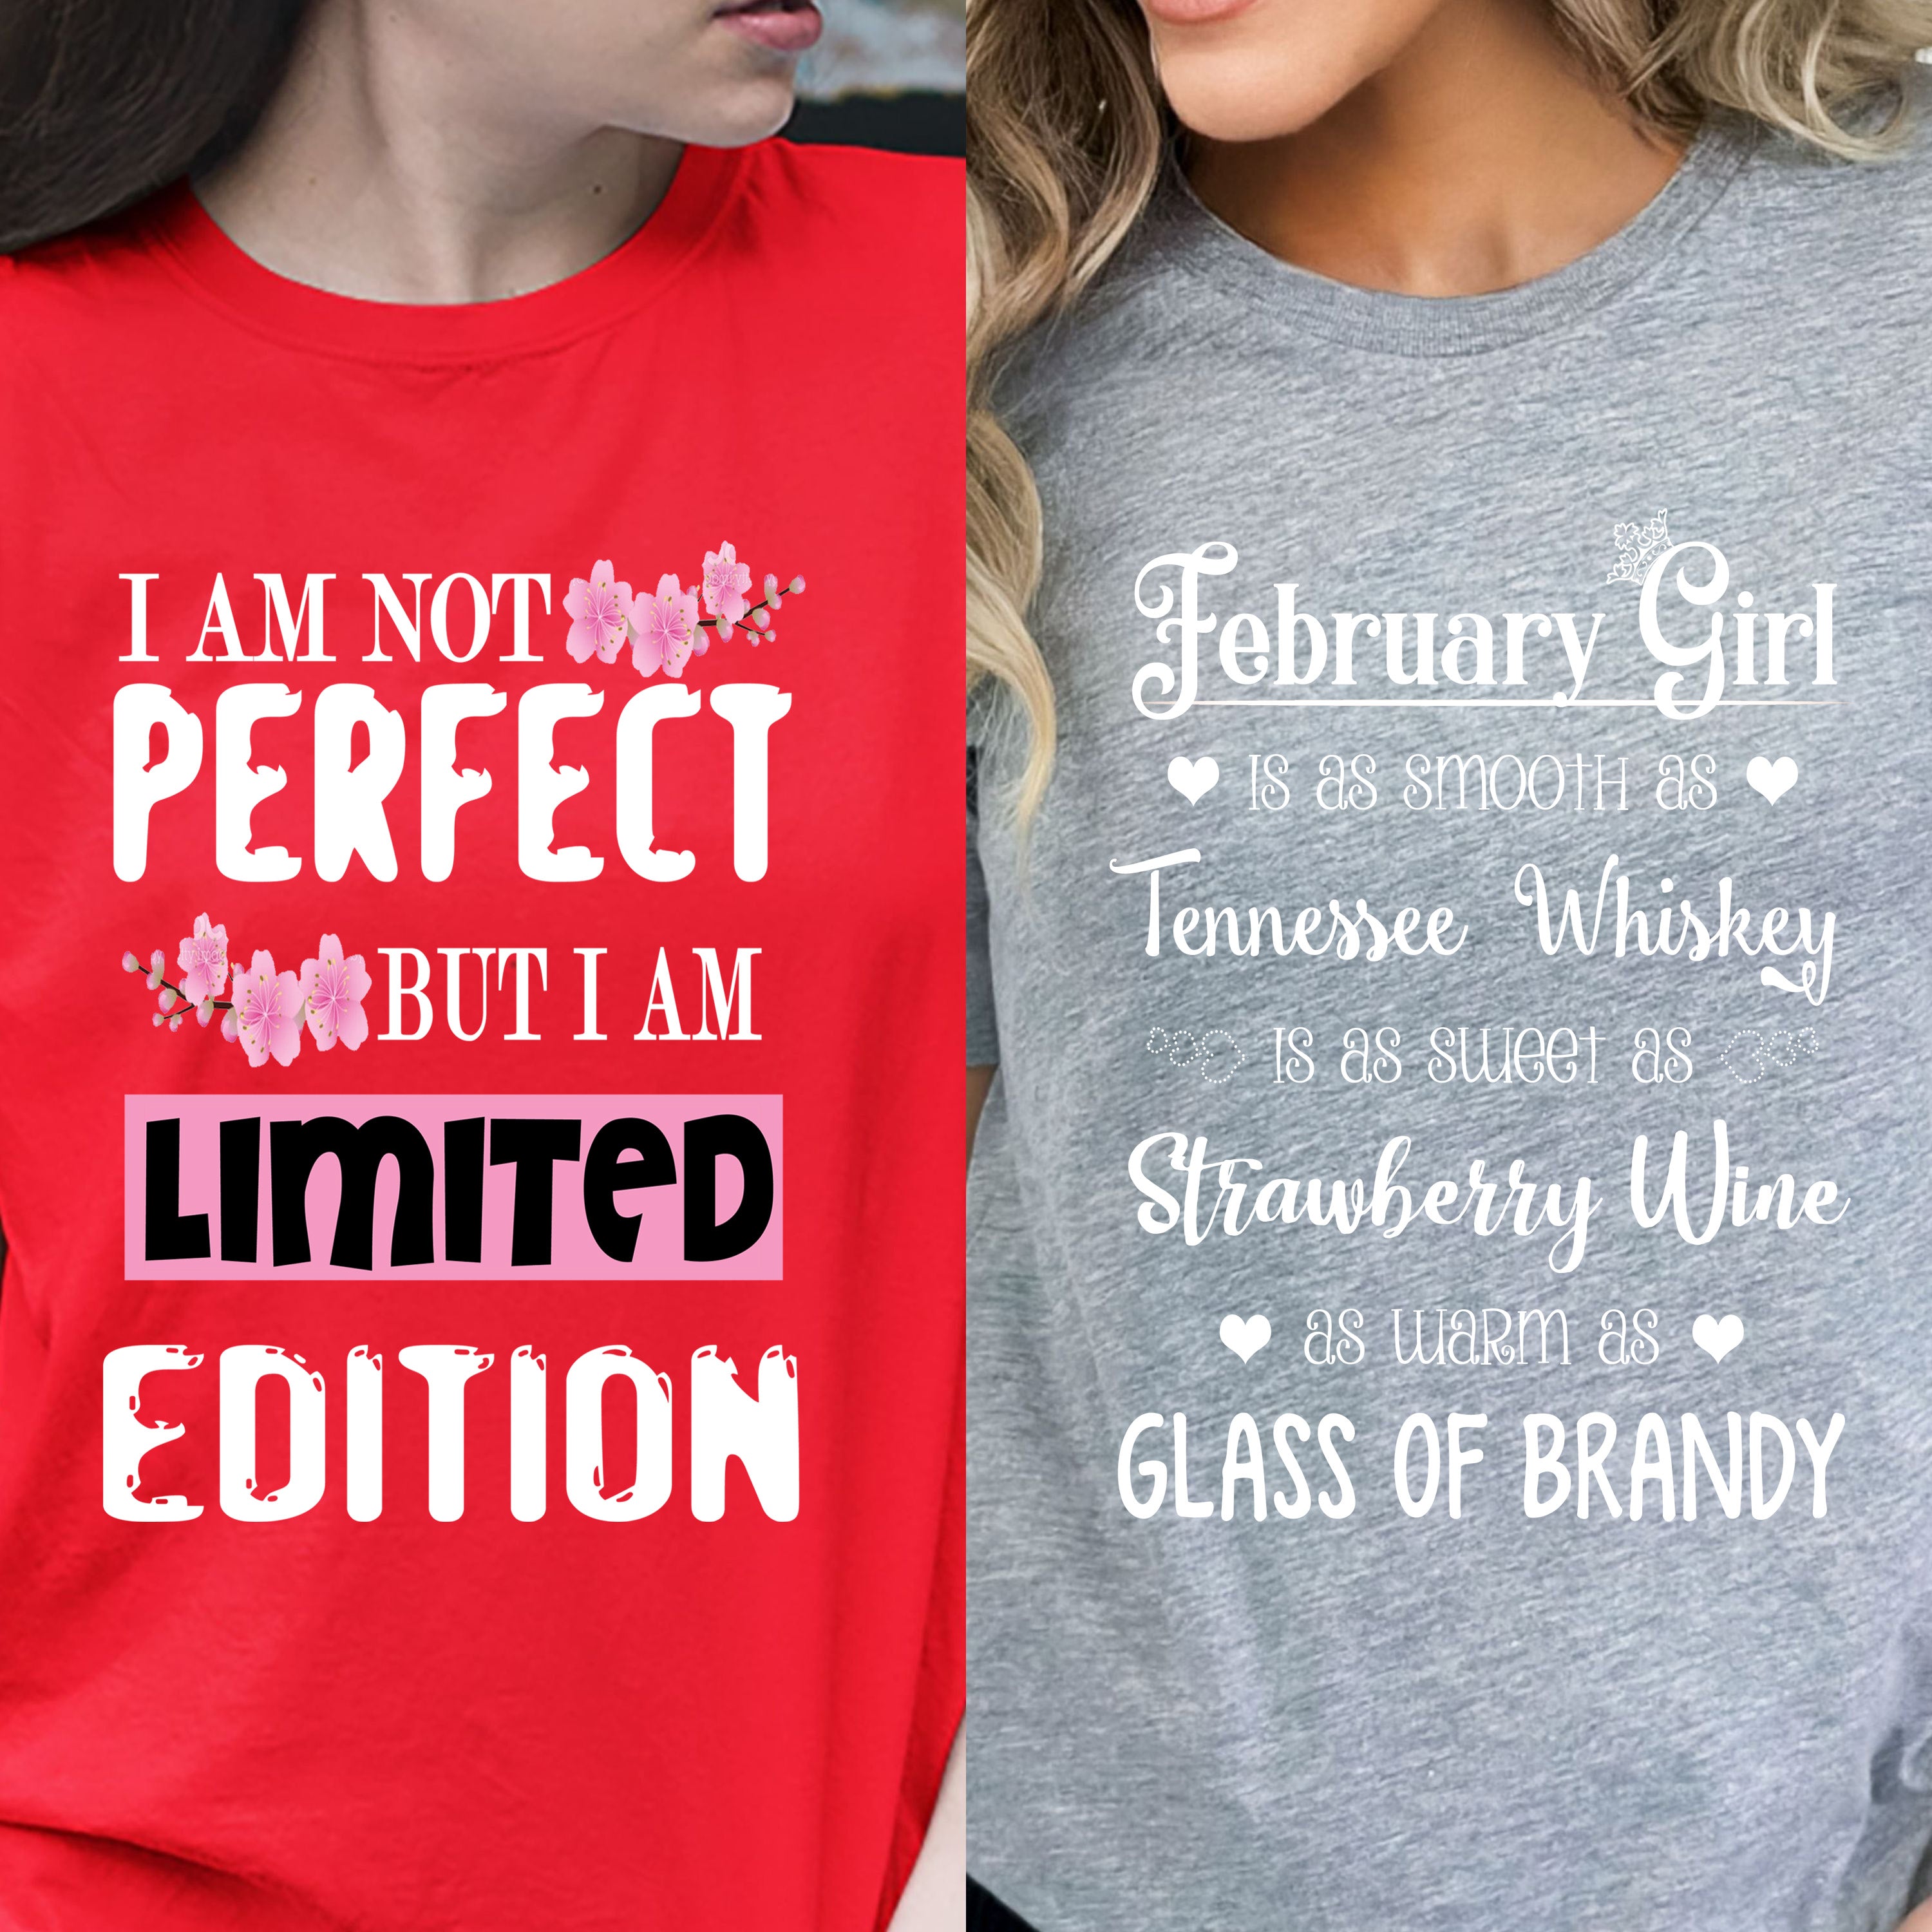 "February-Whiskey & Limited Edition -Pack of 2"